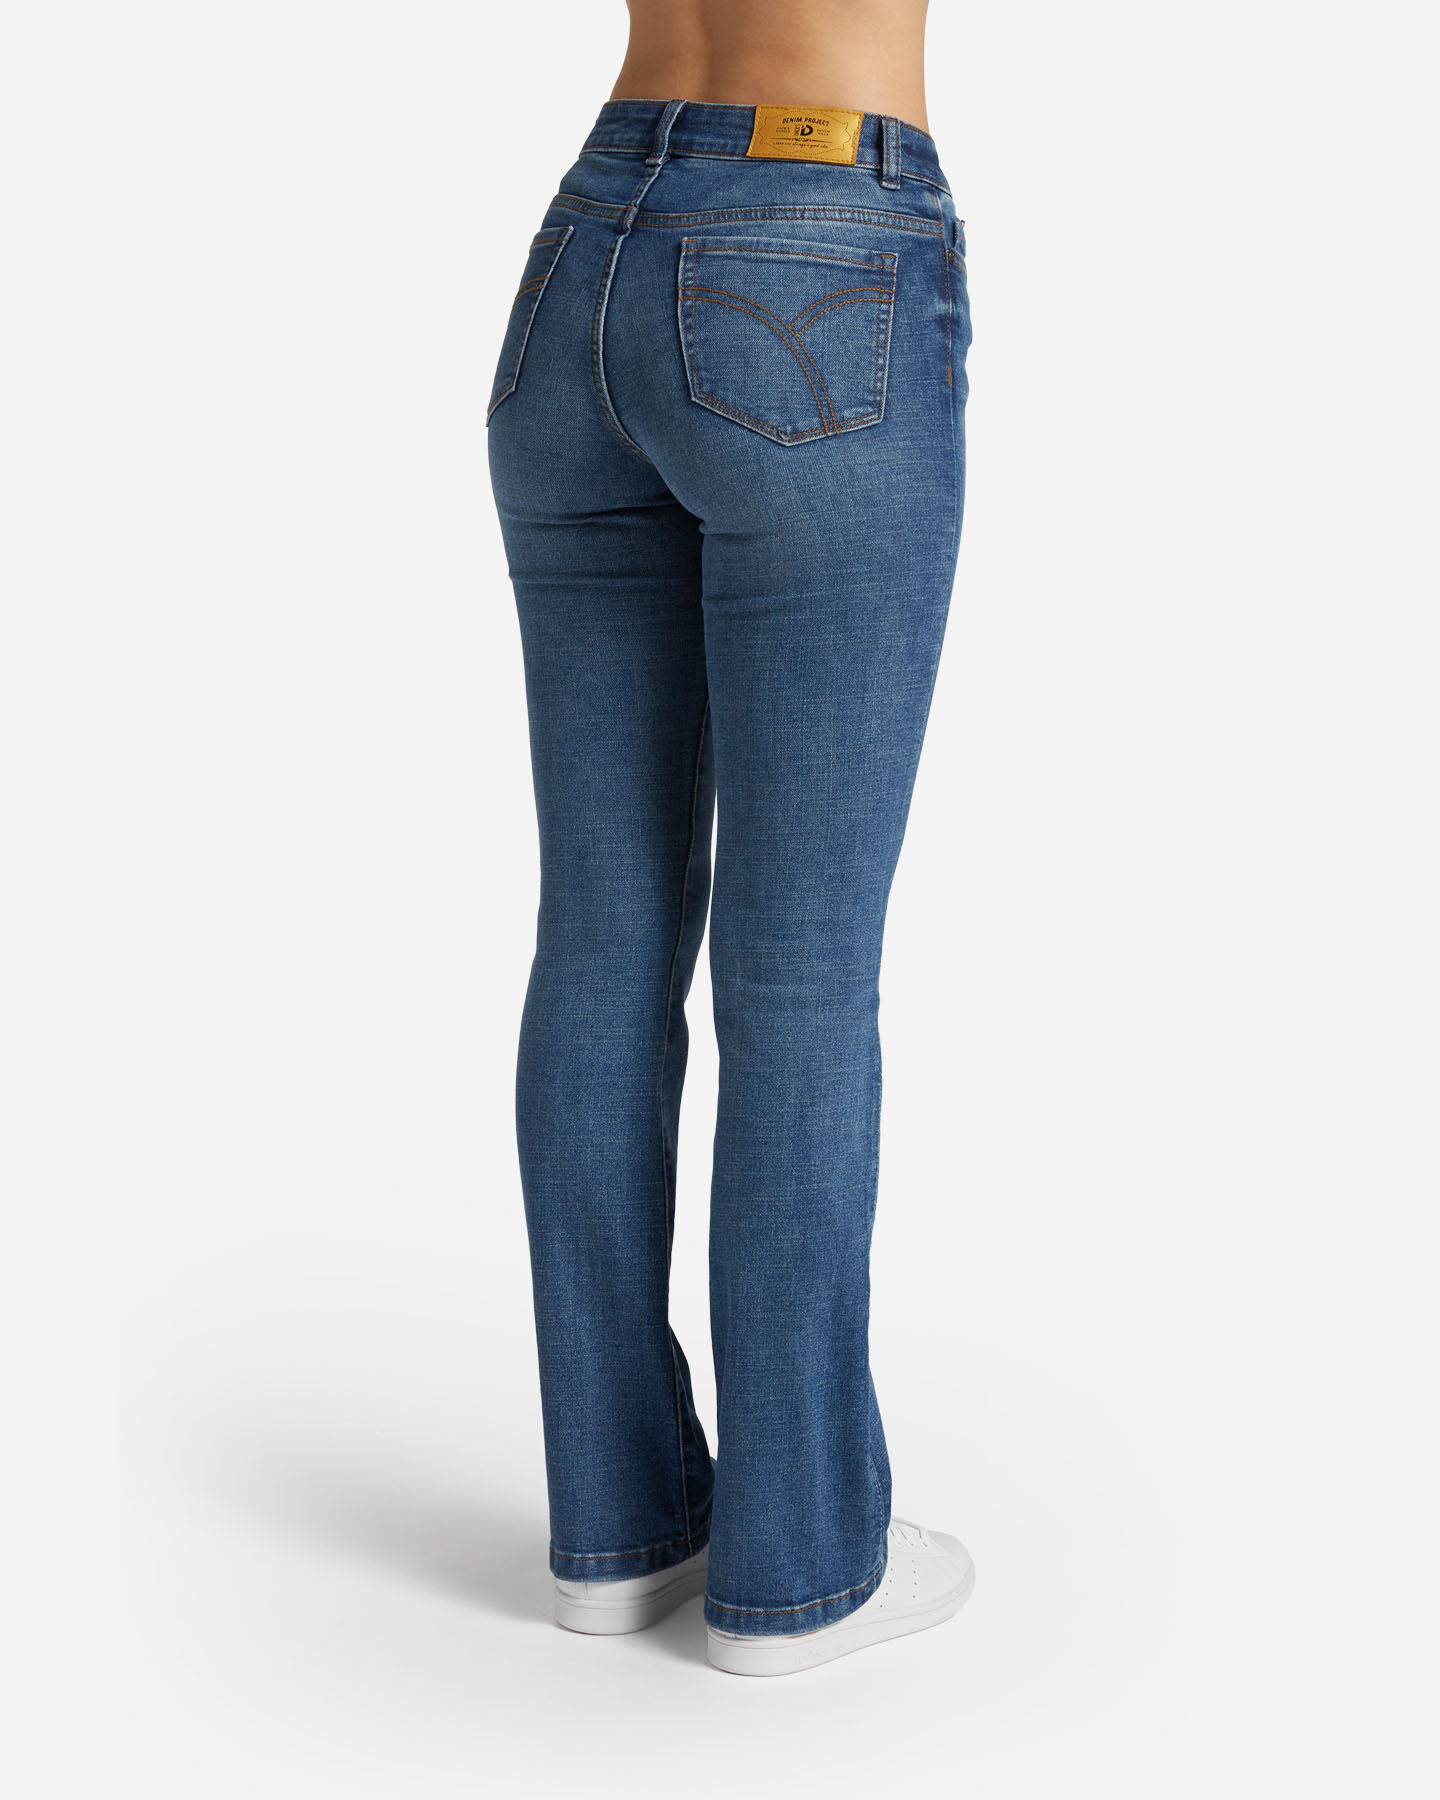  Jeans DACK'S ESSENTIAL W S4130220|MD|42 scatto 1